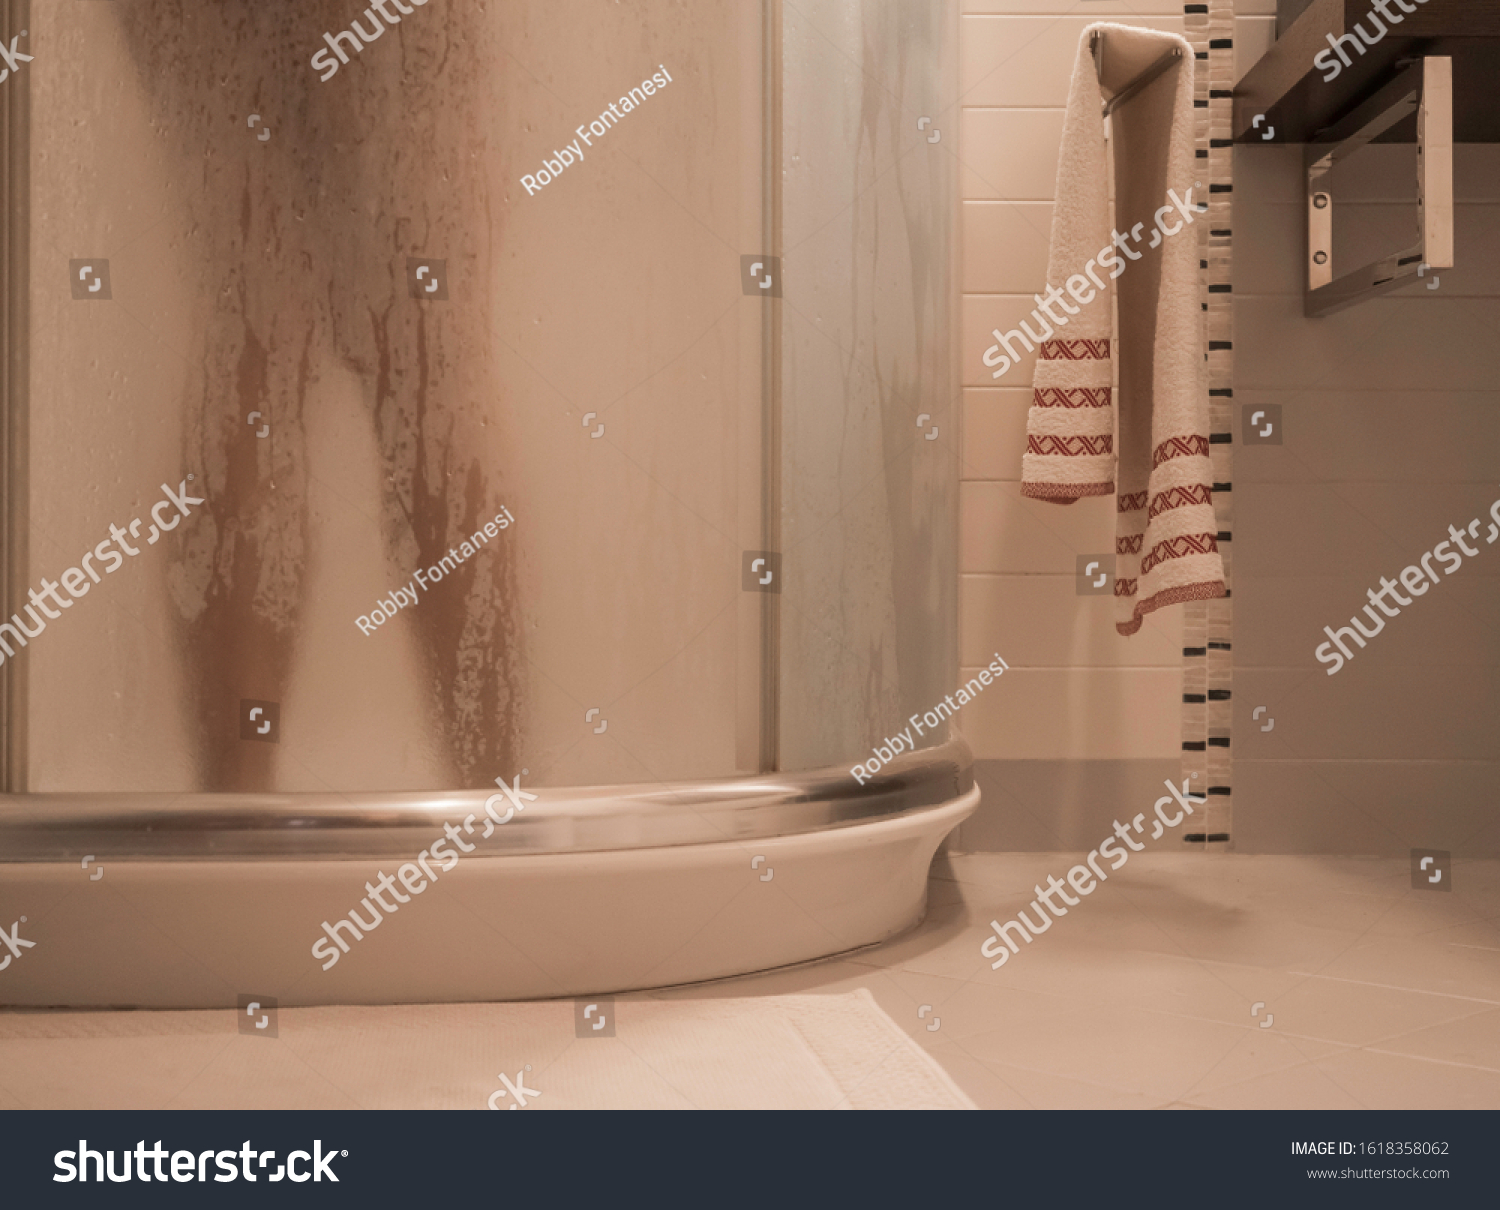 Sexy Naked Womans Legs Inside Shower Stock Photo Shutterstock